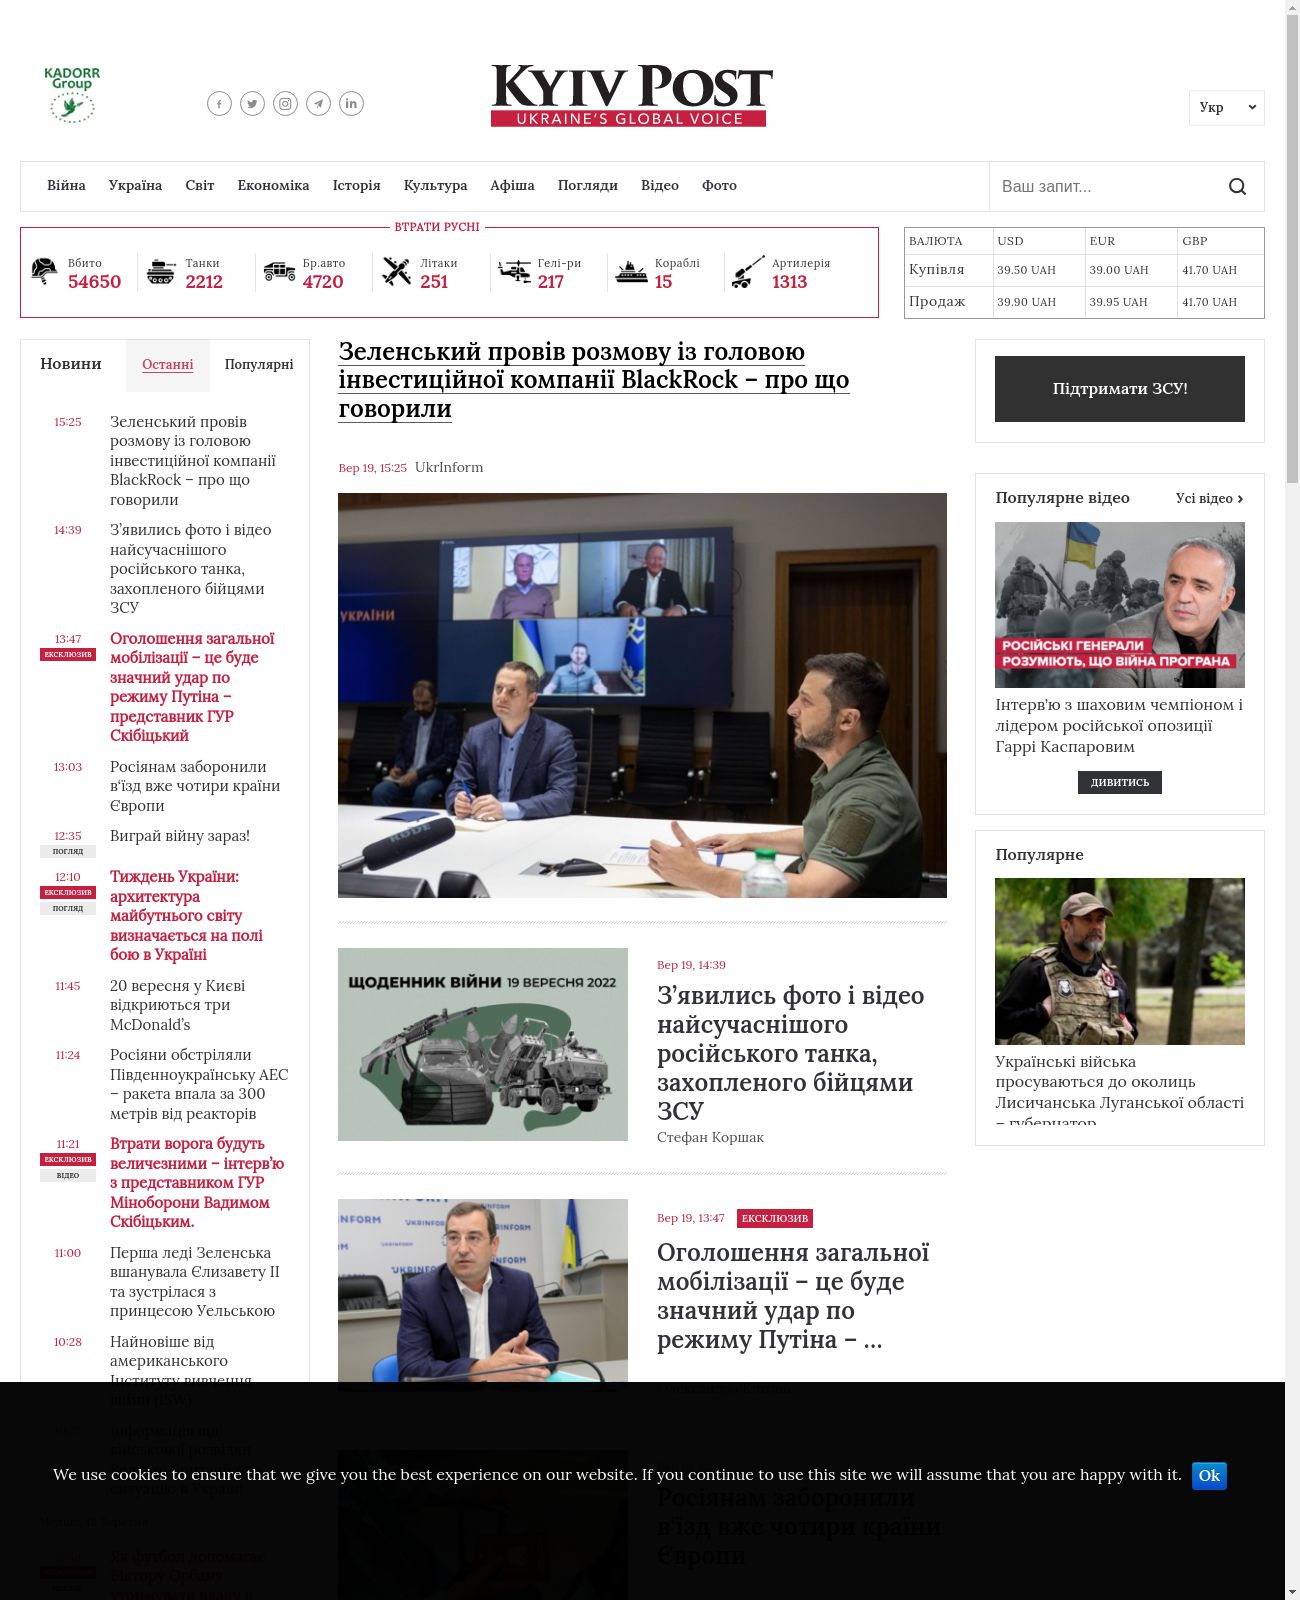 KyivPost at 2022-09-19 15:54:20+03:00 local time